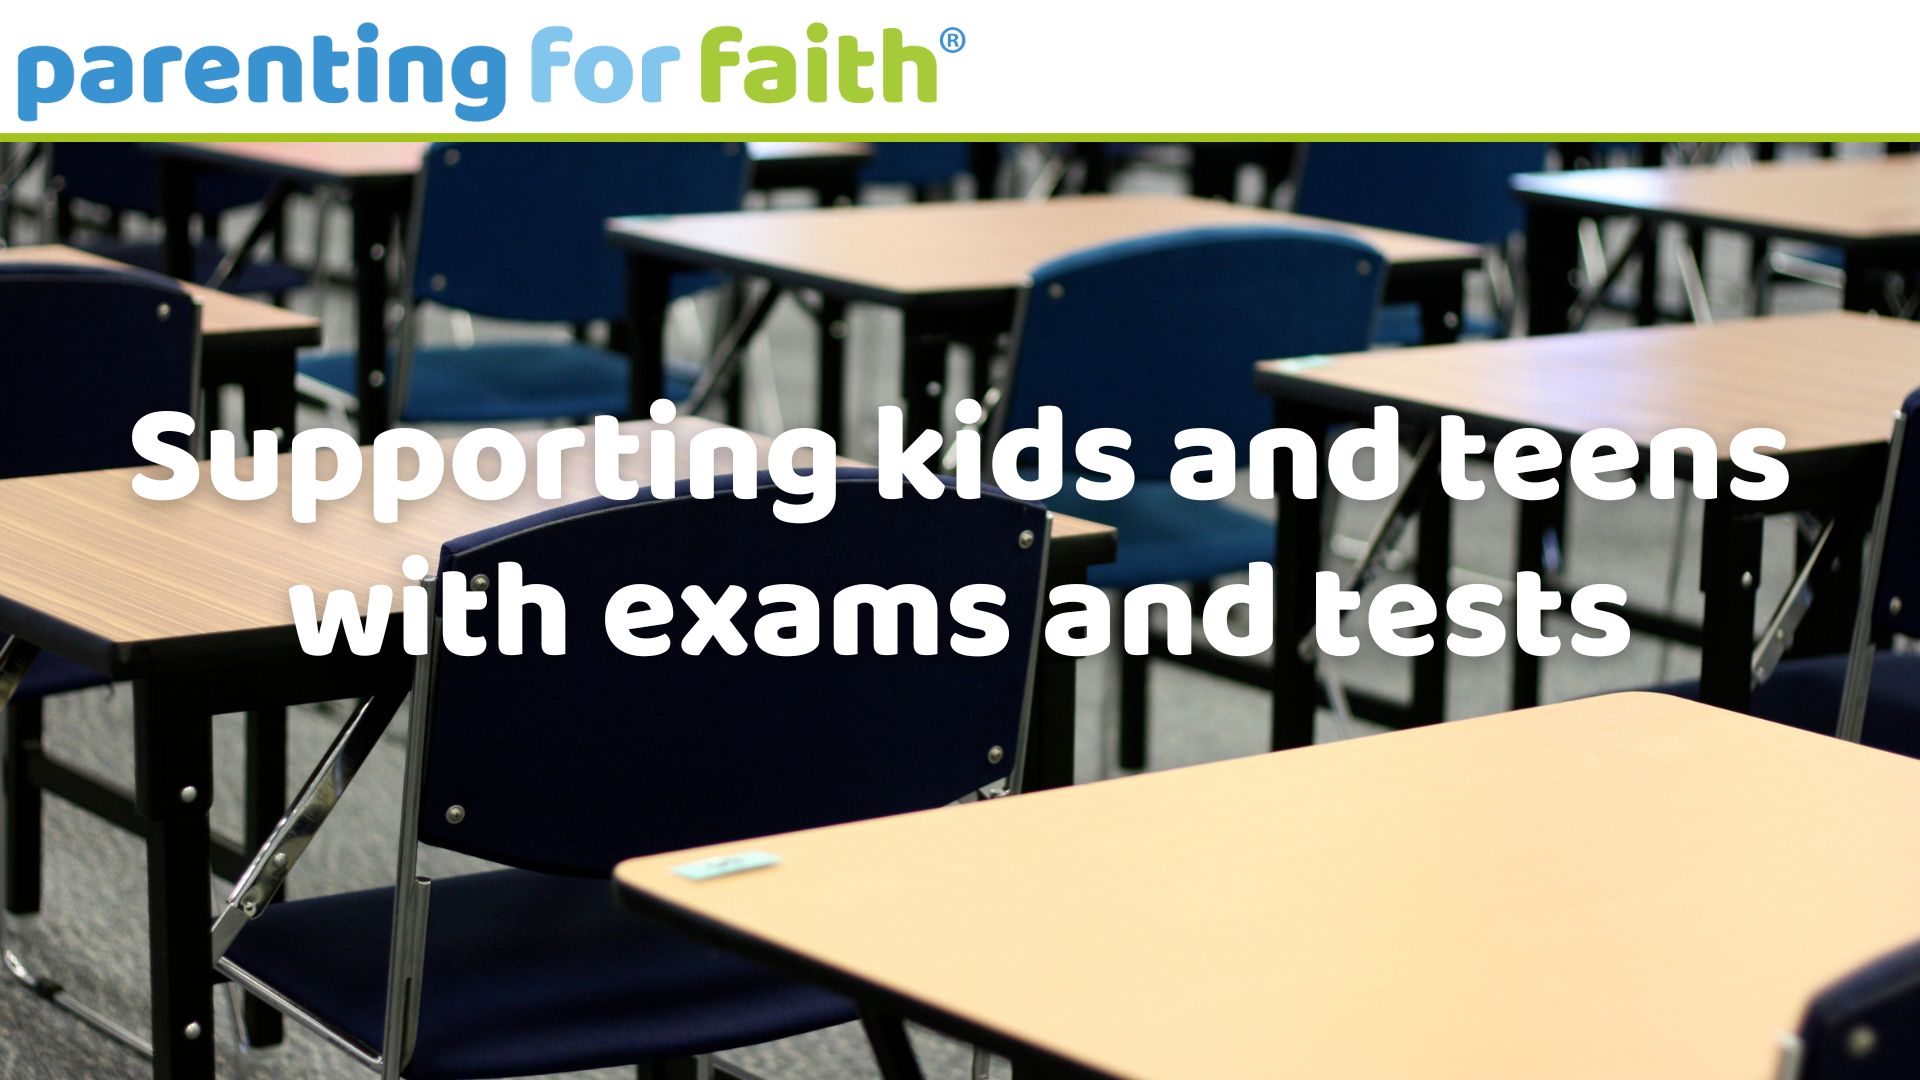 Supporting kids and teens with exams and tests image credit darrenwise Getty Images Signature